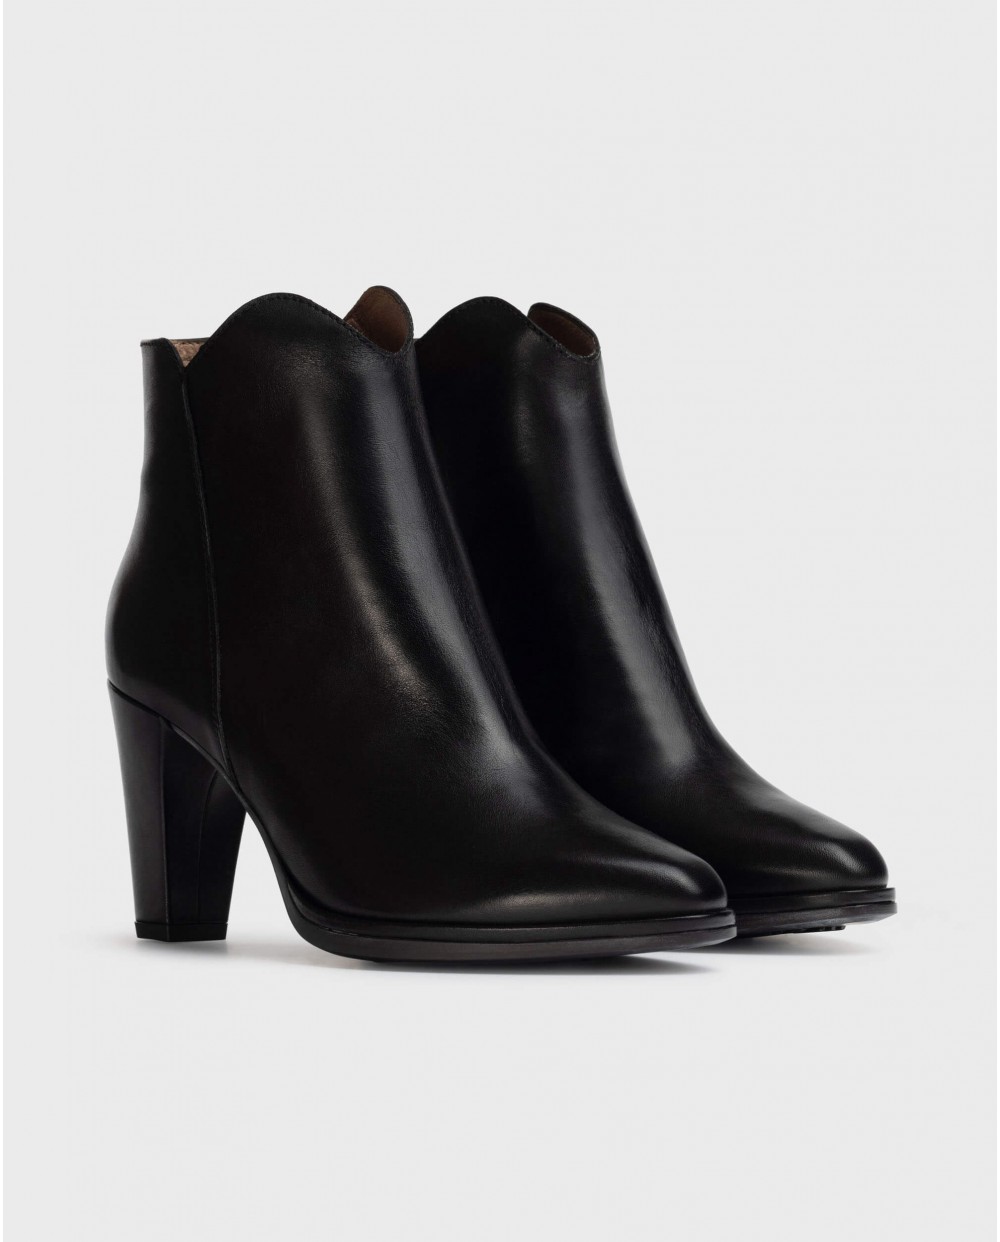 Black Leather ankle boot